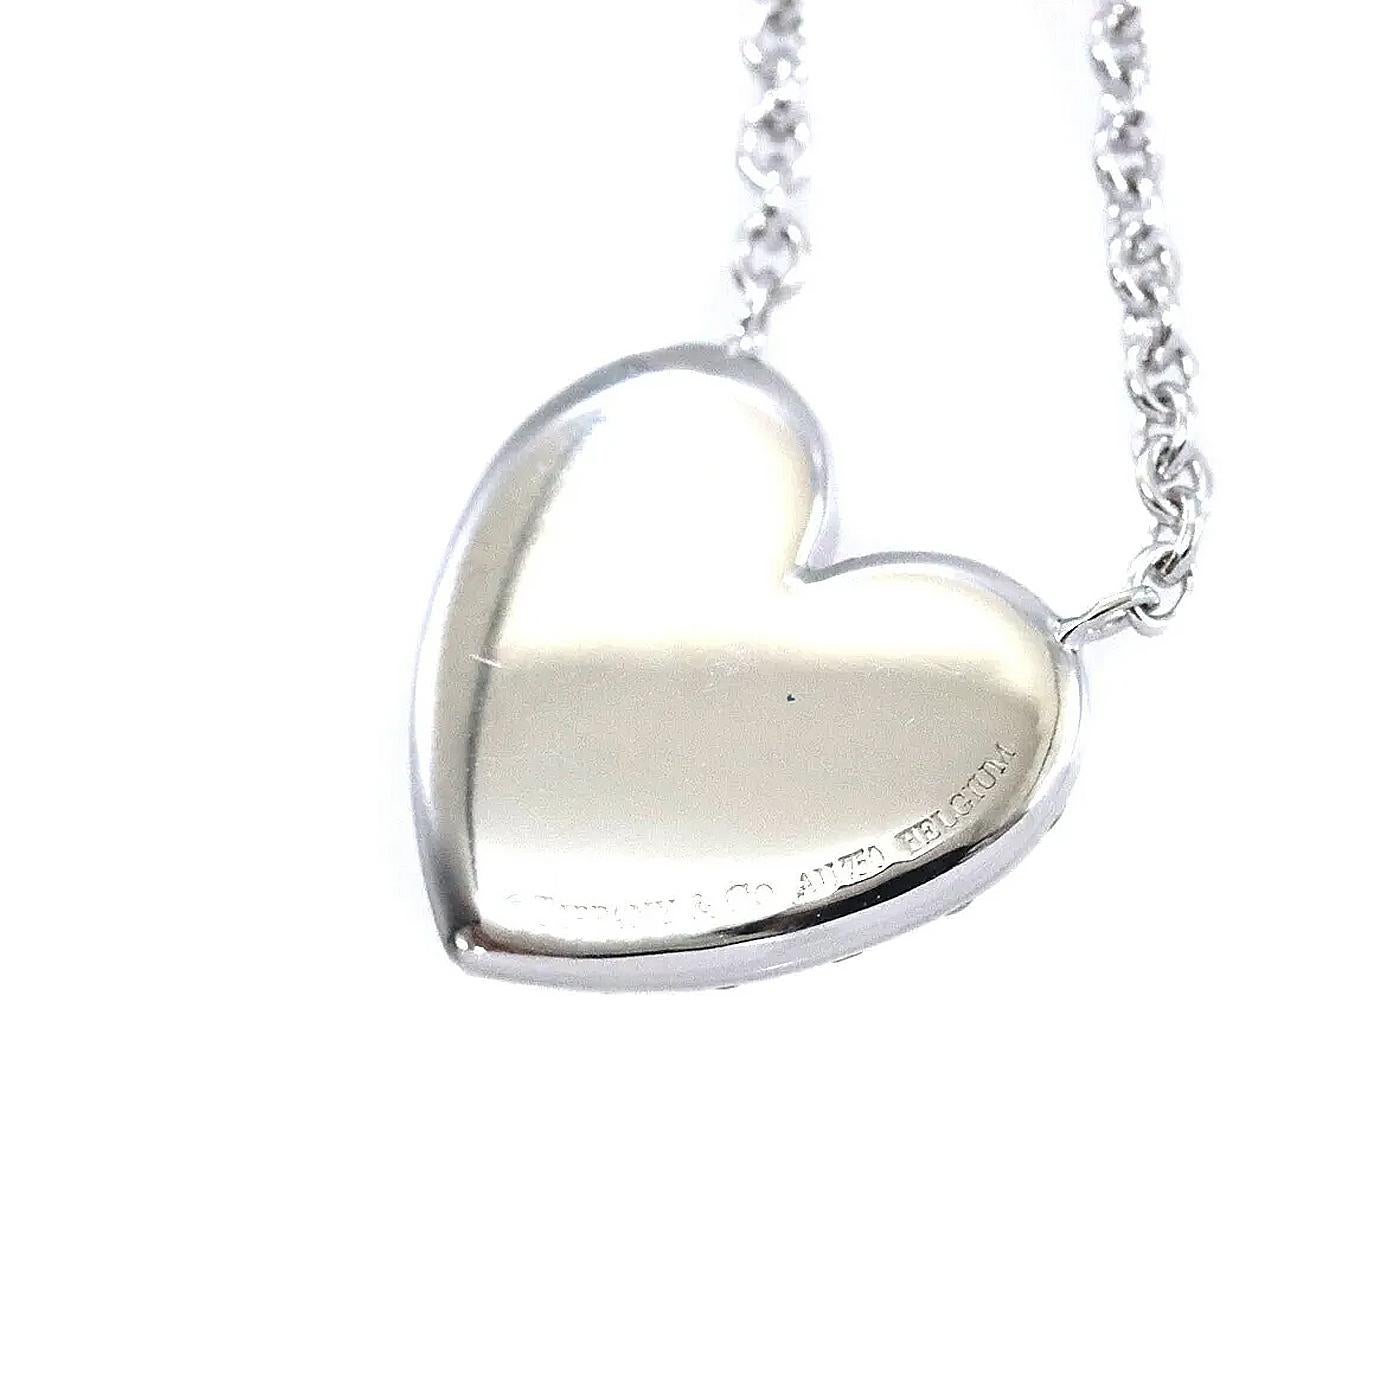 Tiffany & Co. Metro Heart Pave Diamond Necklace 750 Engraved 18K White Gold In Good Condition For Sale In Aventura, FL